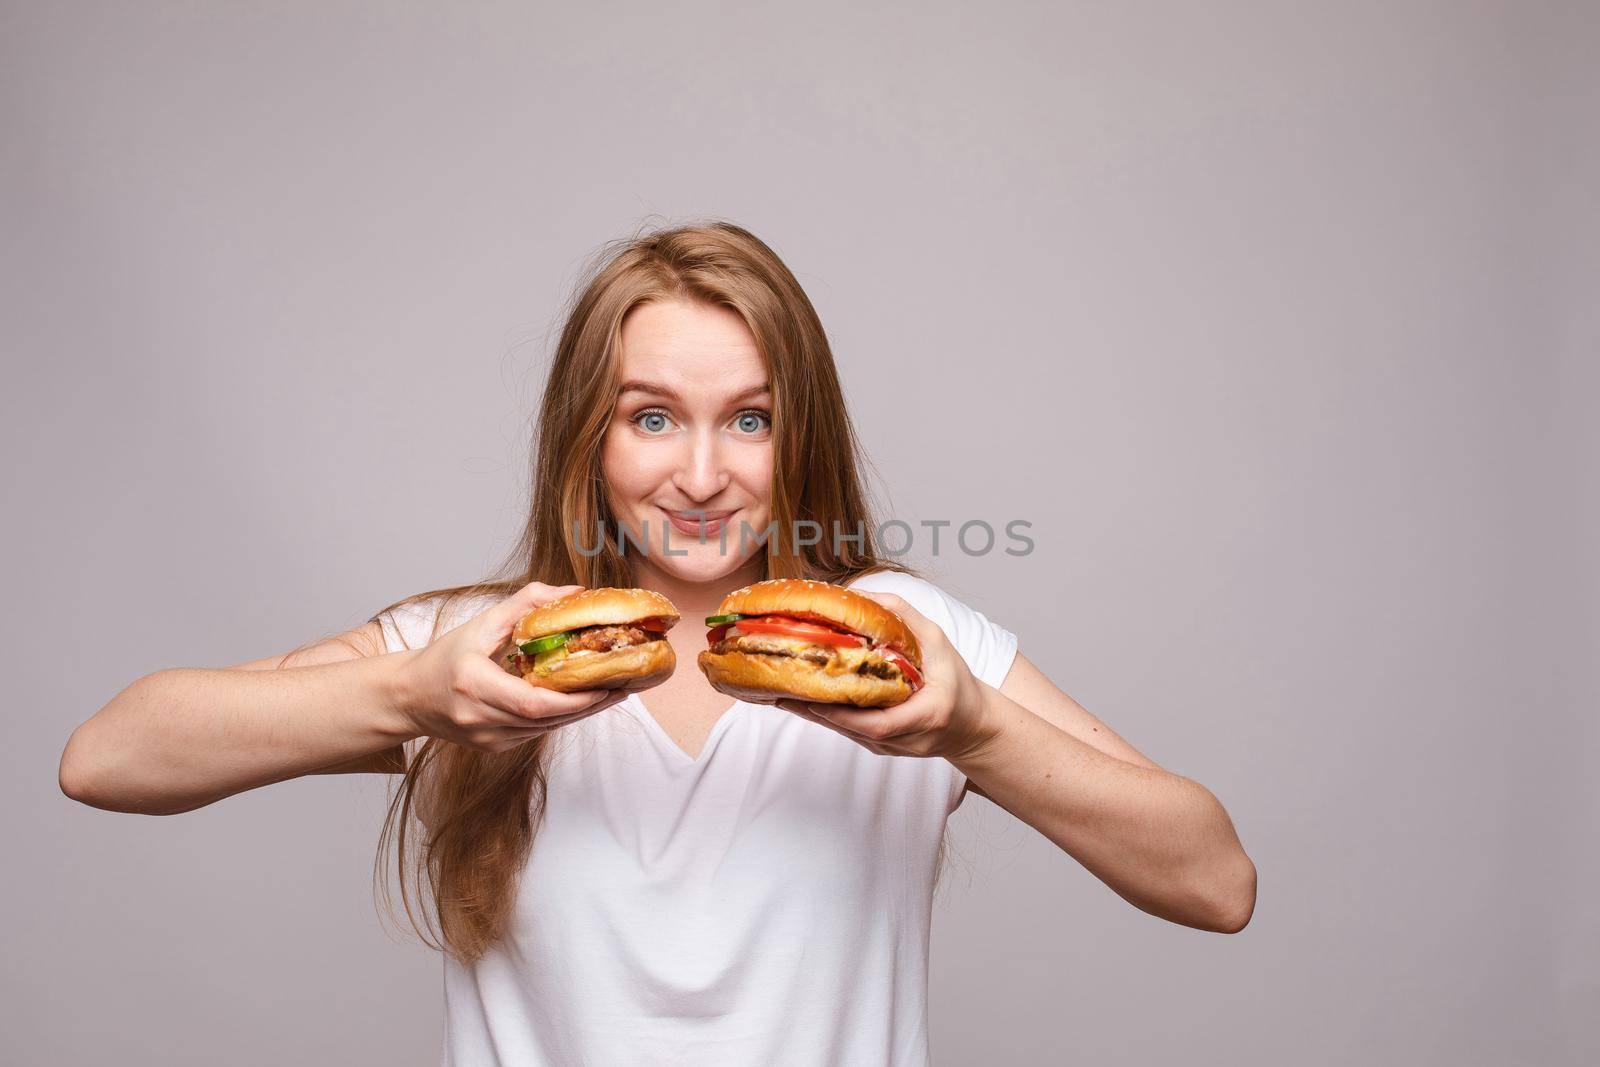 Close-up of unrecognizable brunette smiling woman holding two delicious fresh burgers with juicy roasted chicken and rocket salad.